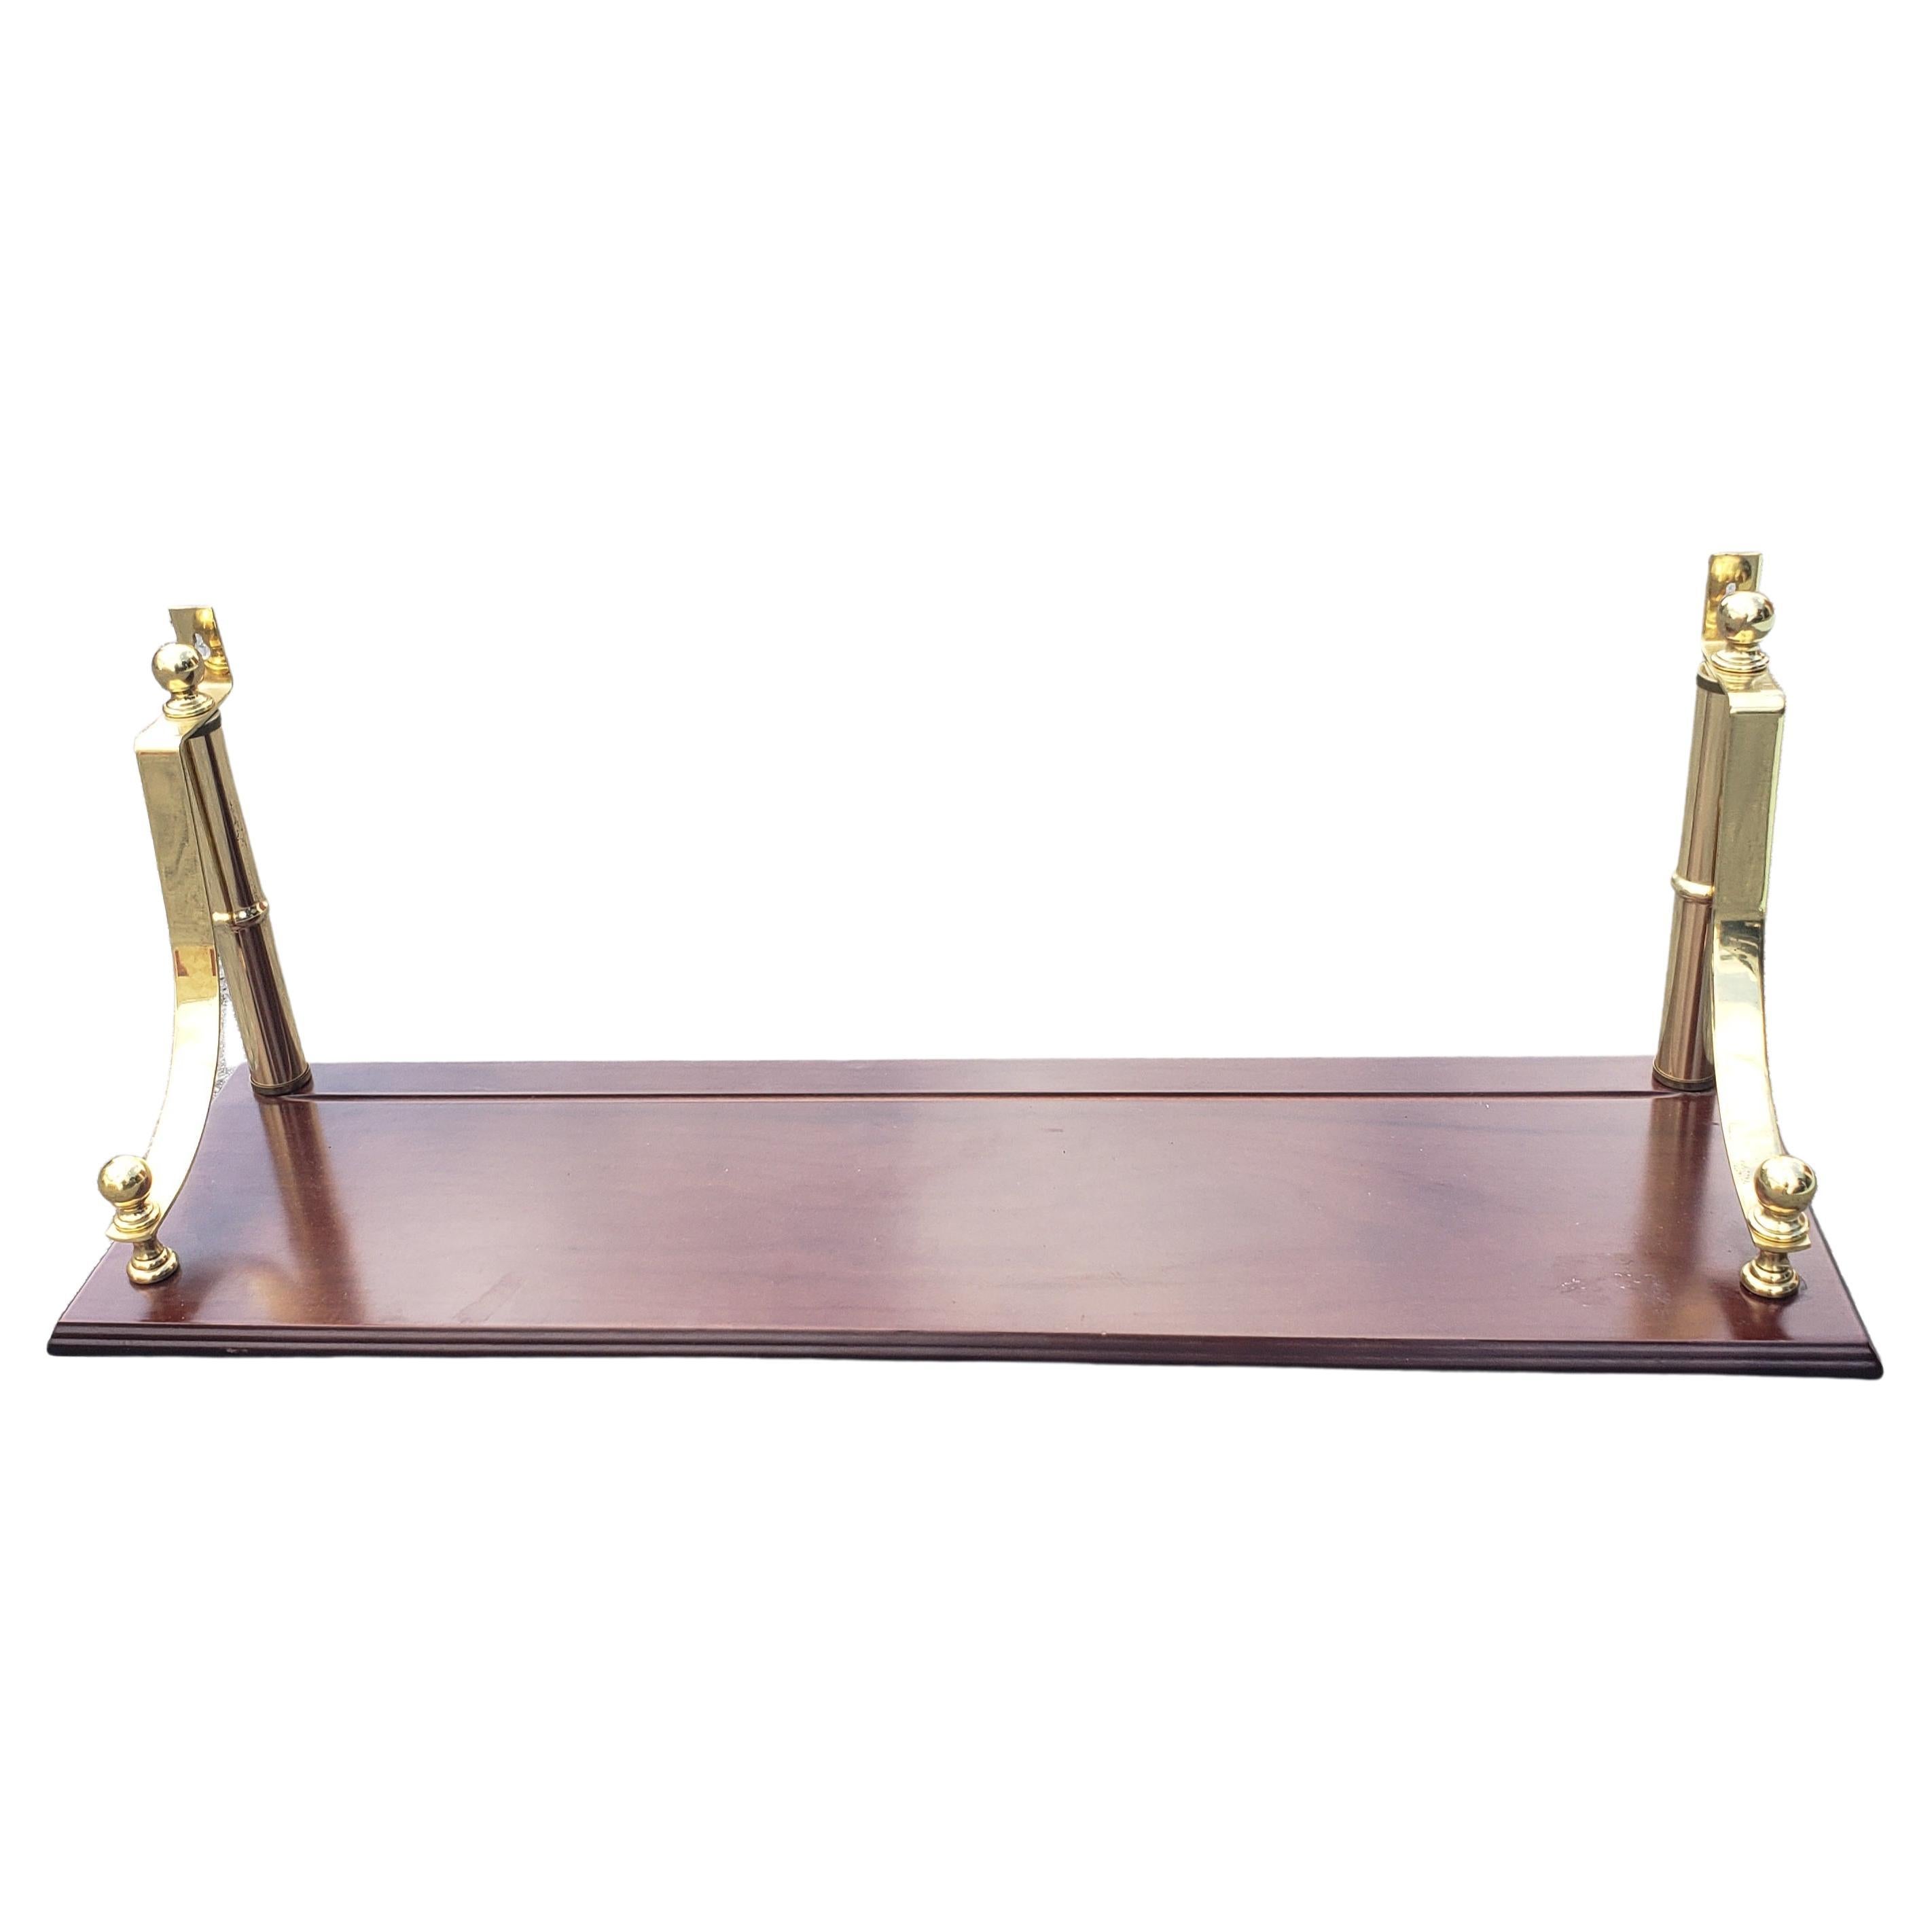 A Solid Mahogany and Brass Mounted Wall Shelf.
Measuring 30 inches in width, 8.5 inches in depth and 11.5 inches in height.
